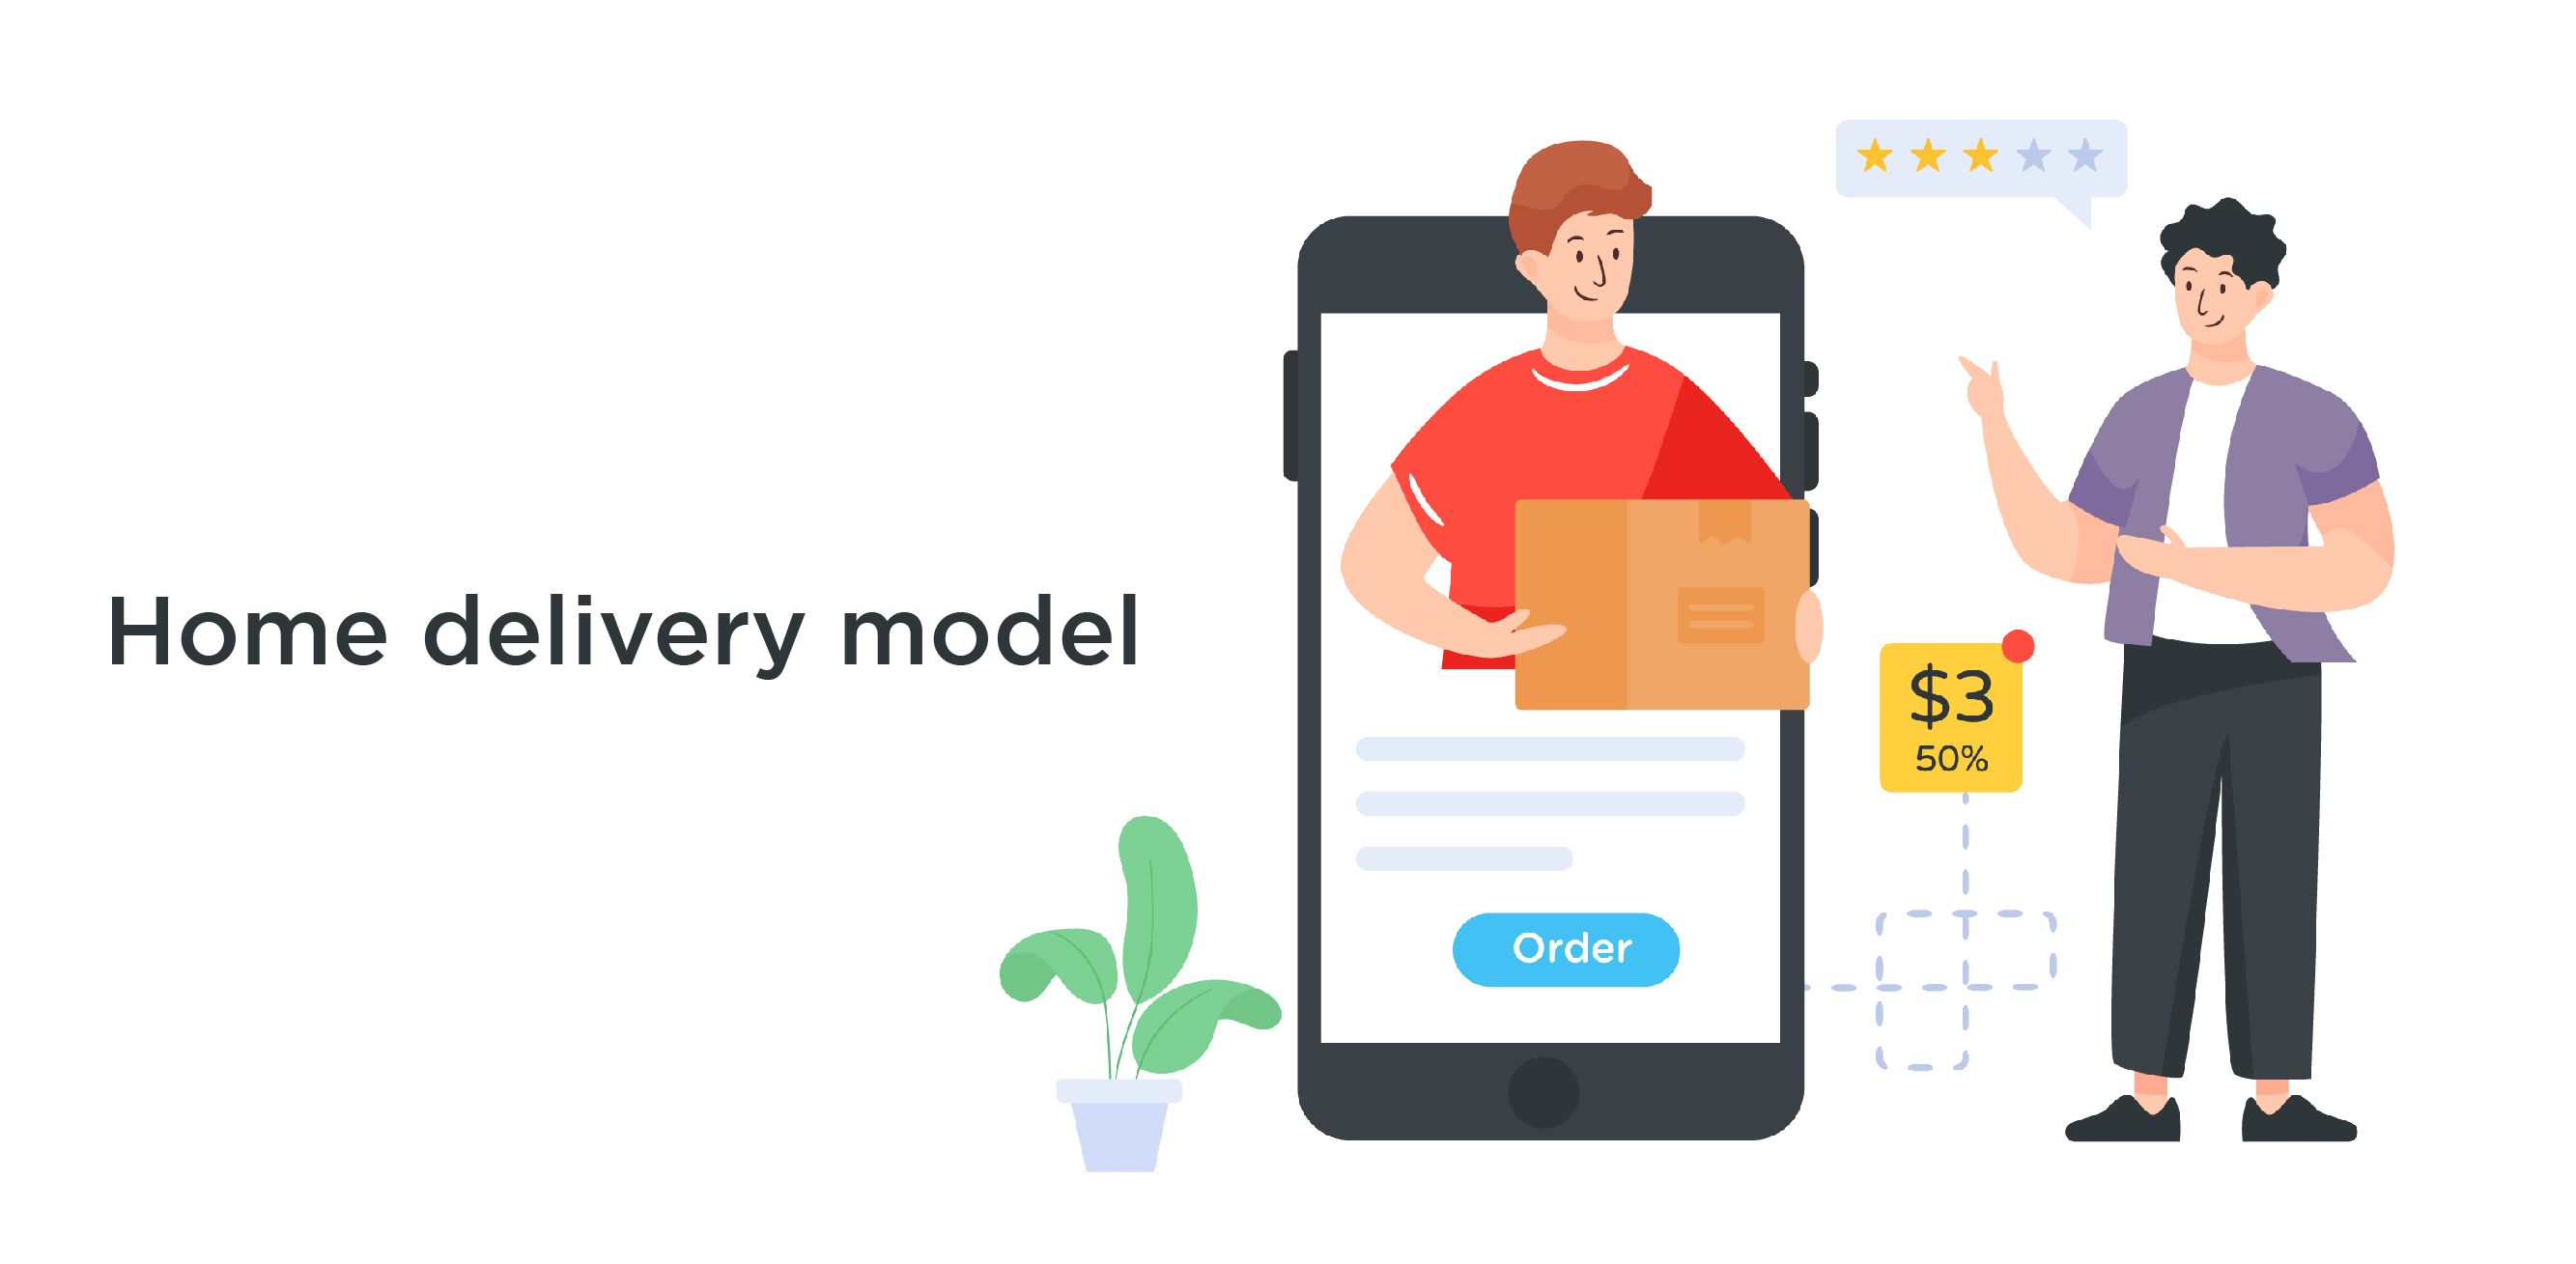 Home delivery model